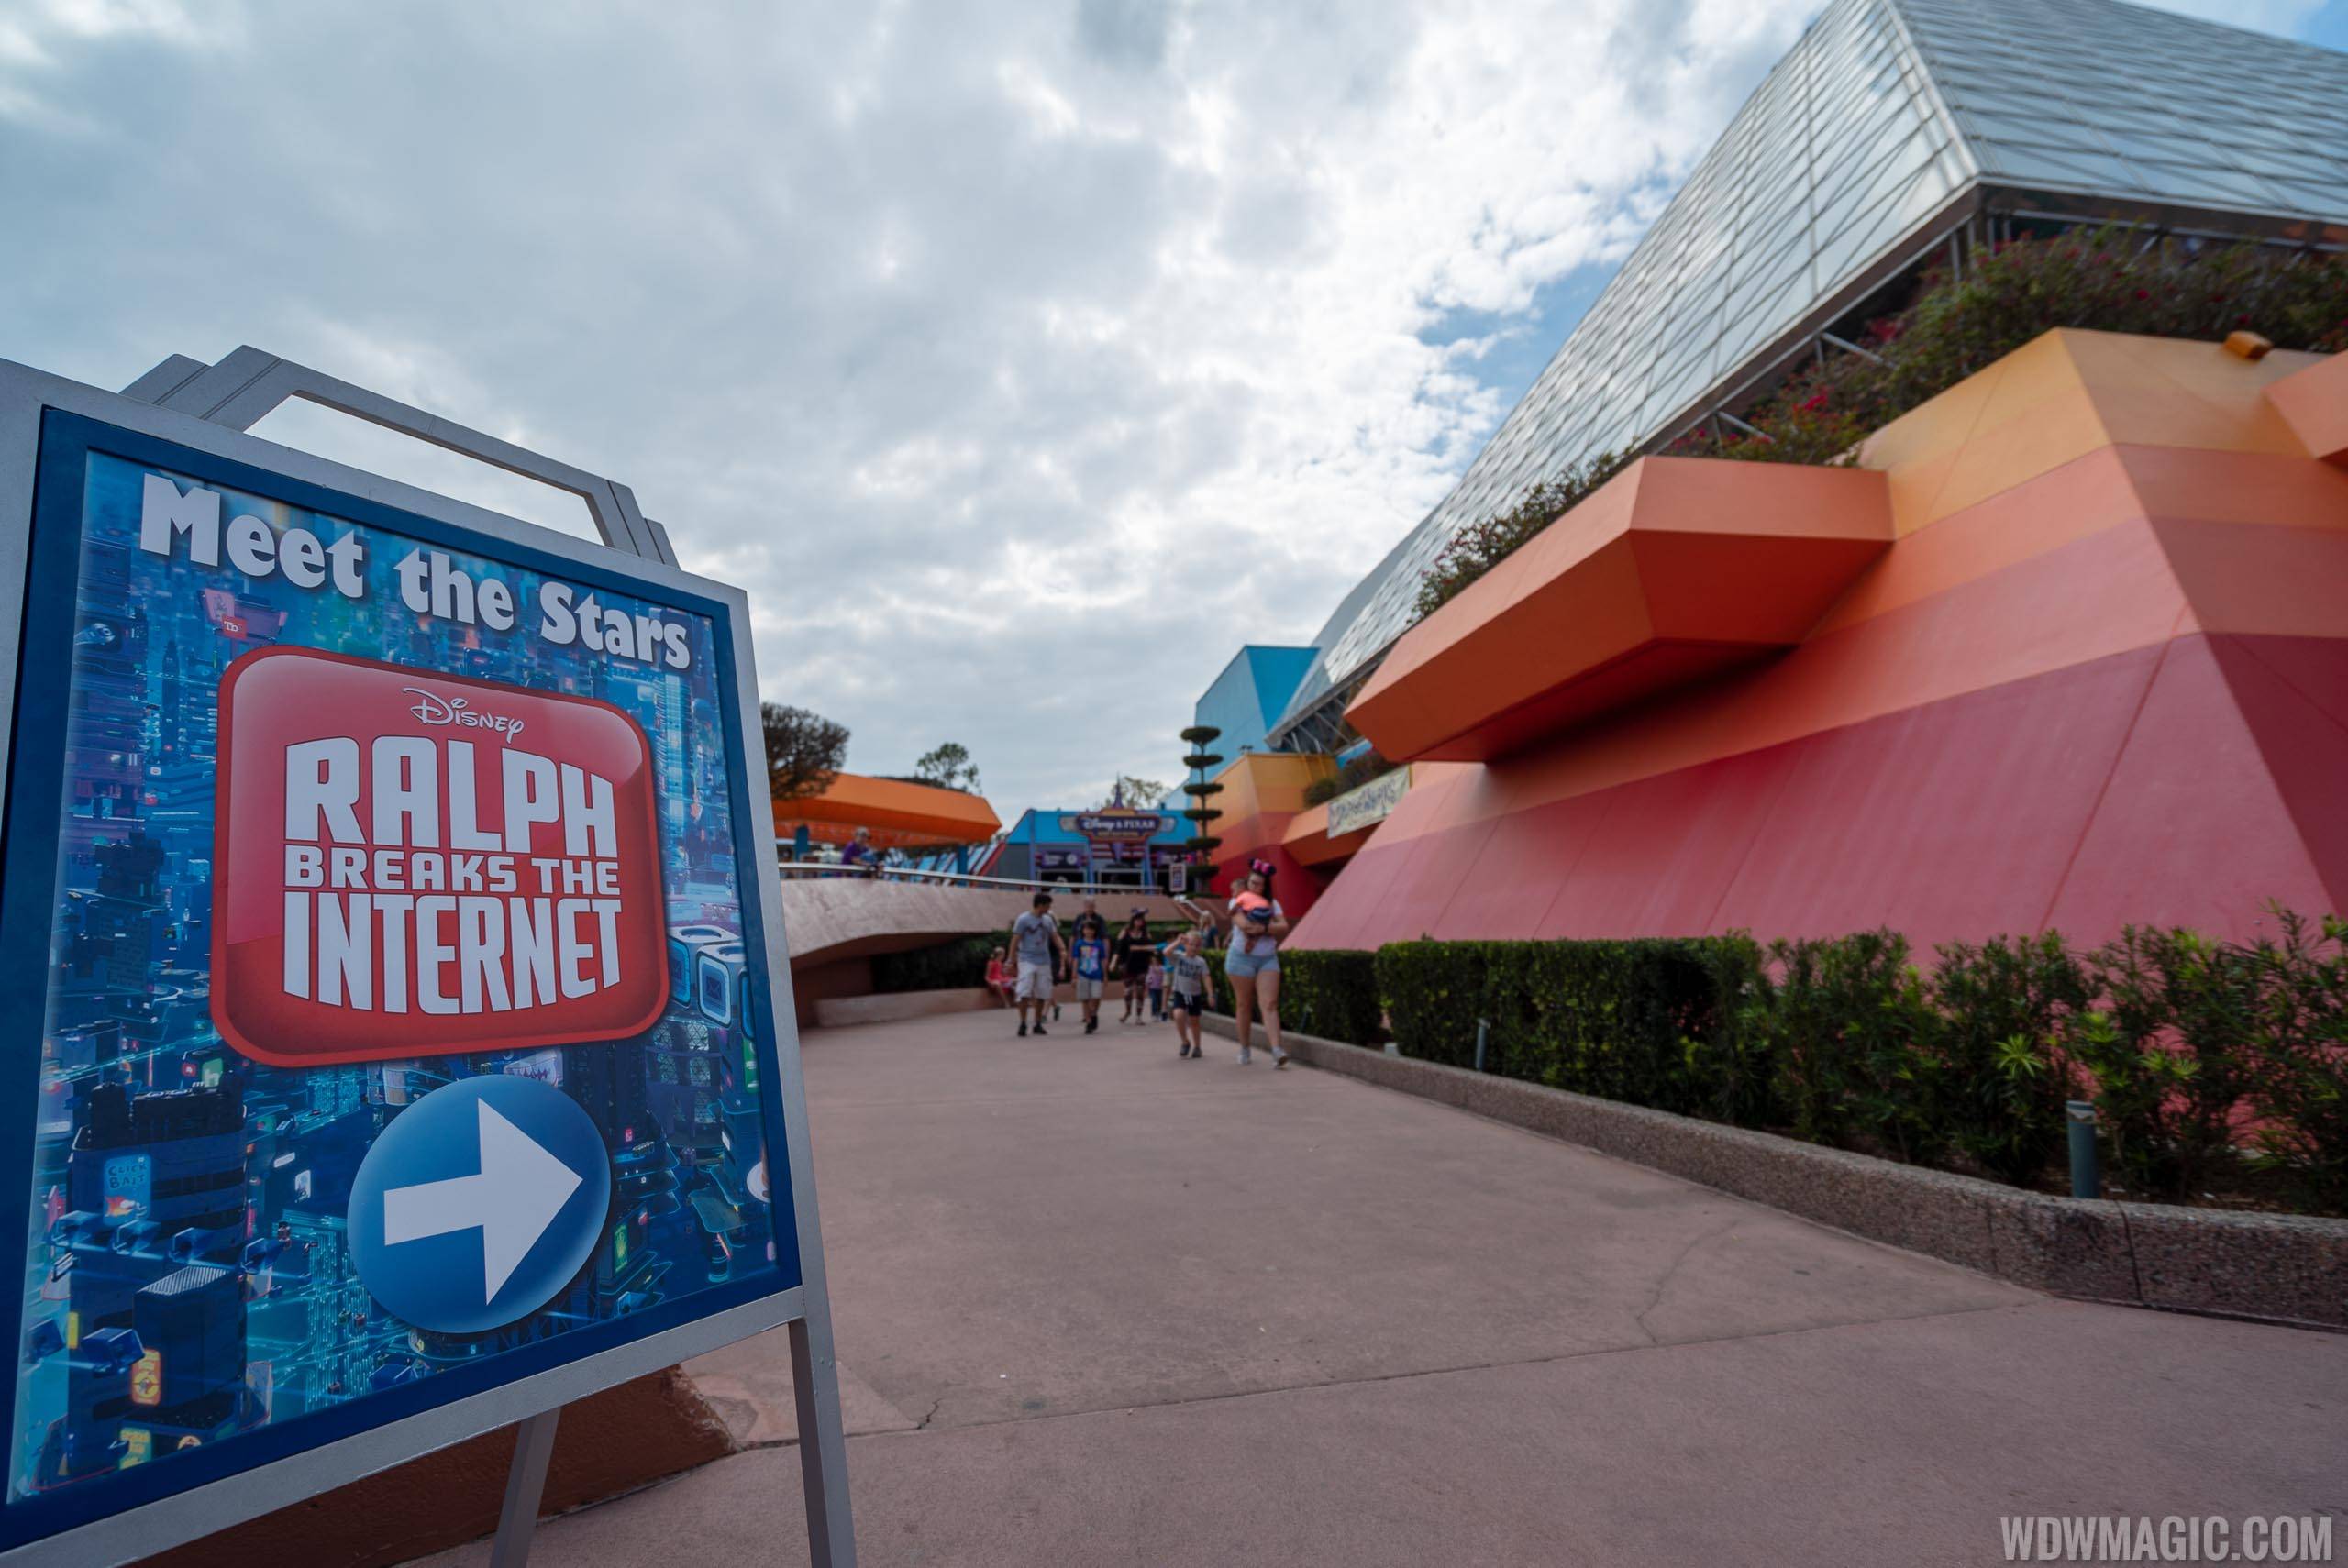 Wreck-It Ralph and Vanellope meet and greet now located inside Imagination Pavilion